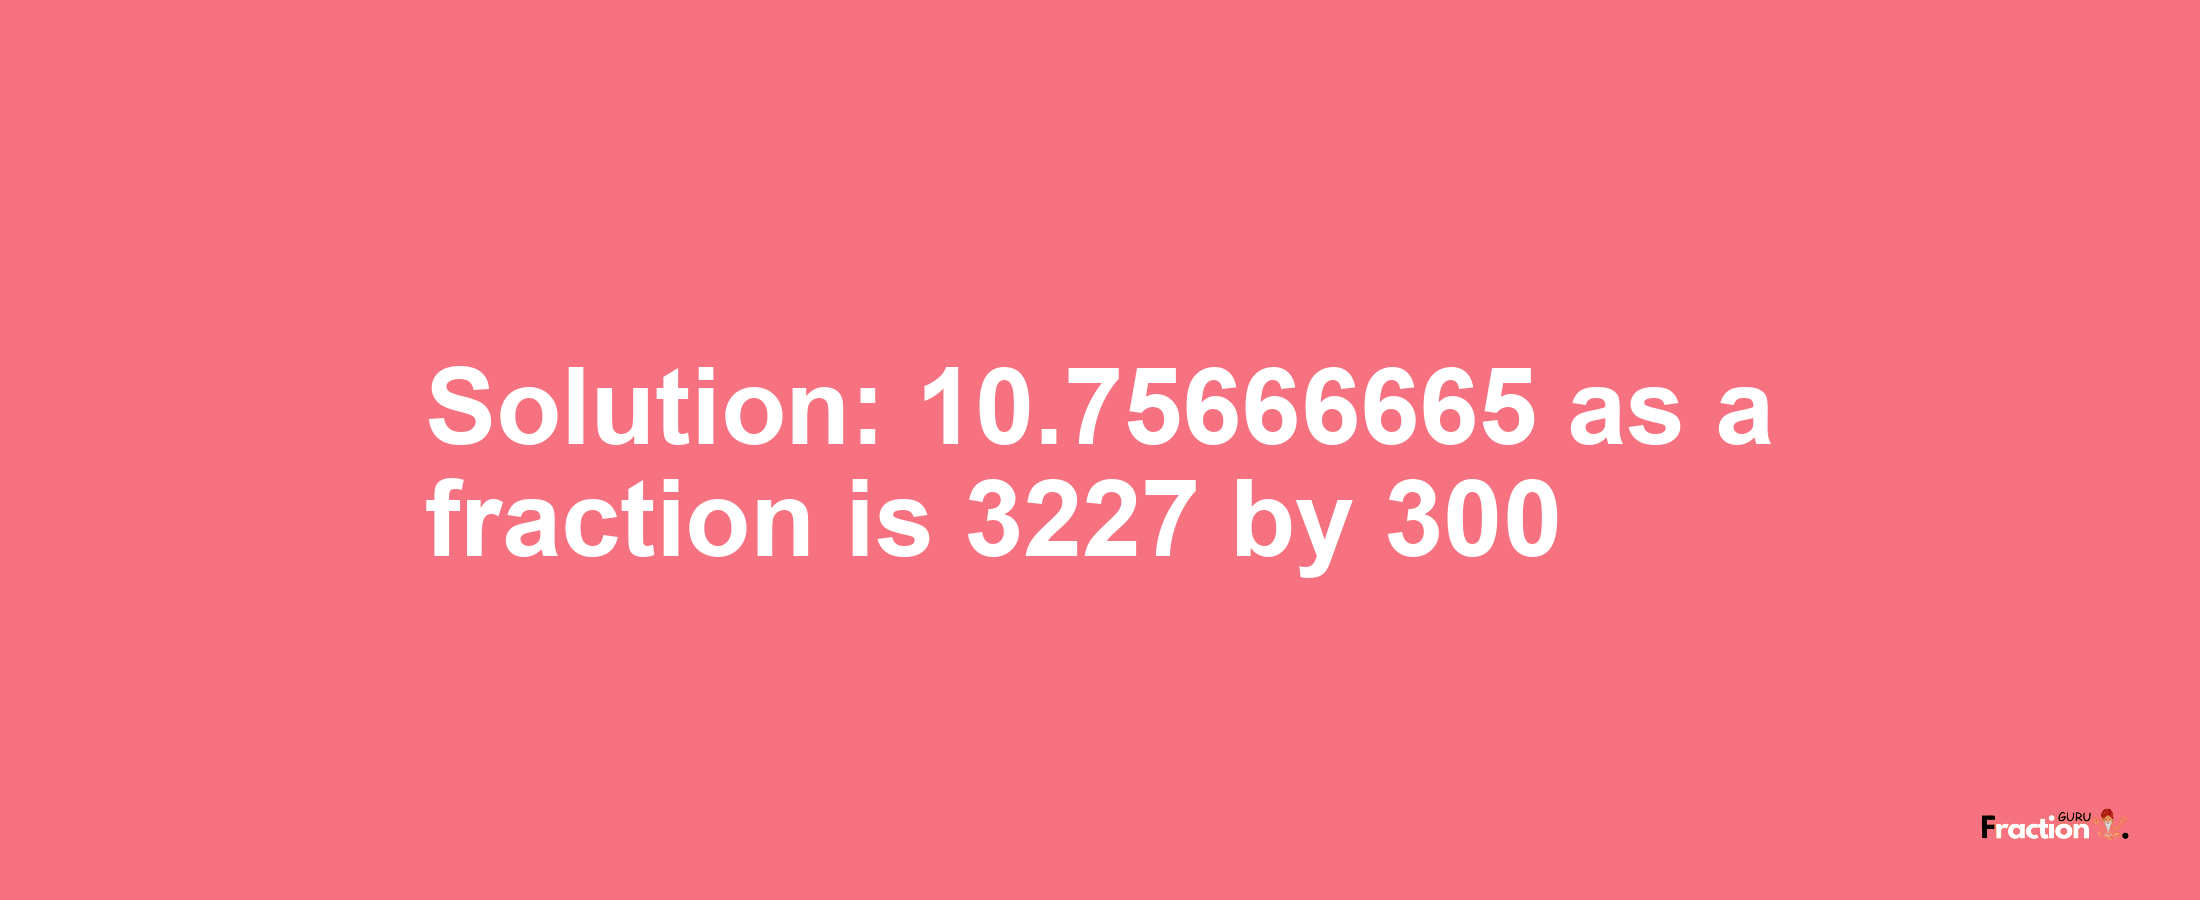 Solution:10.75666665 as a fraction is 3227/300